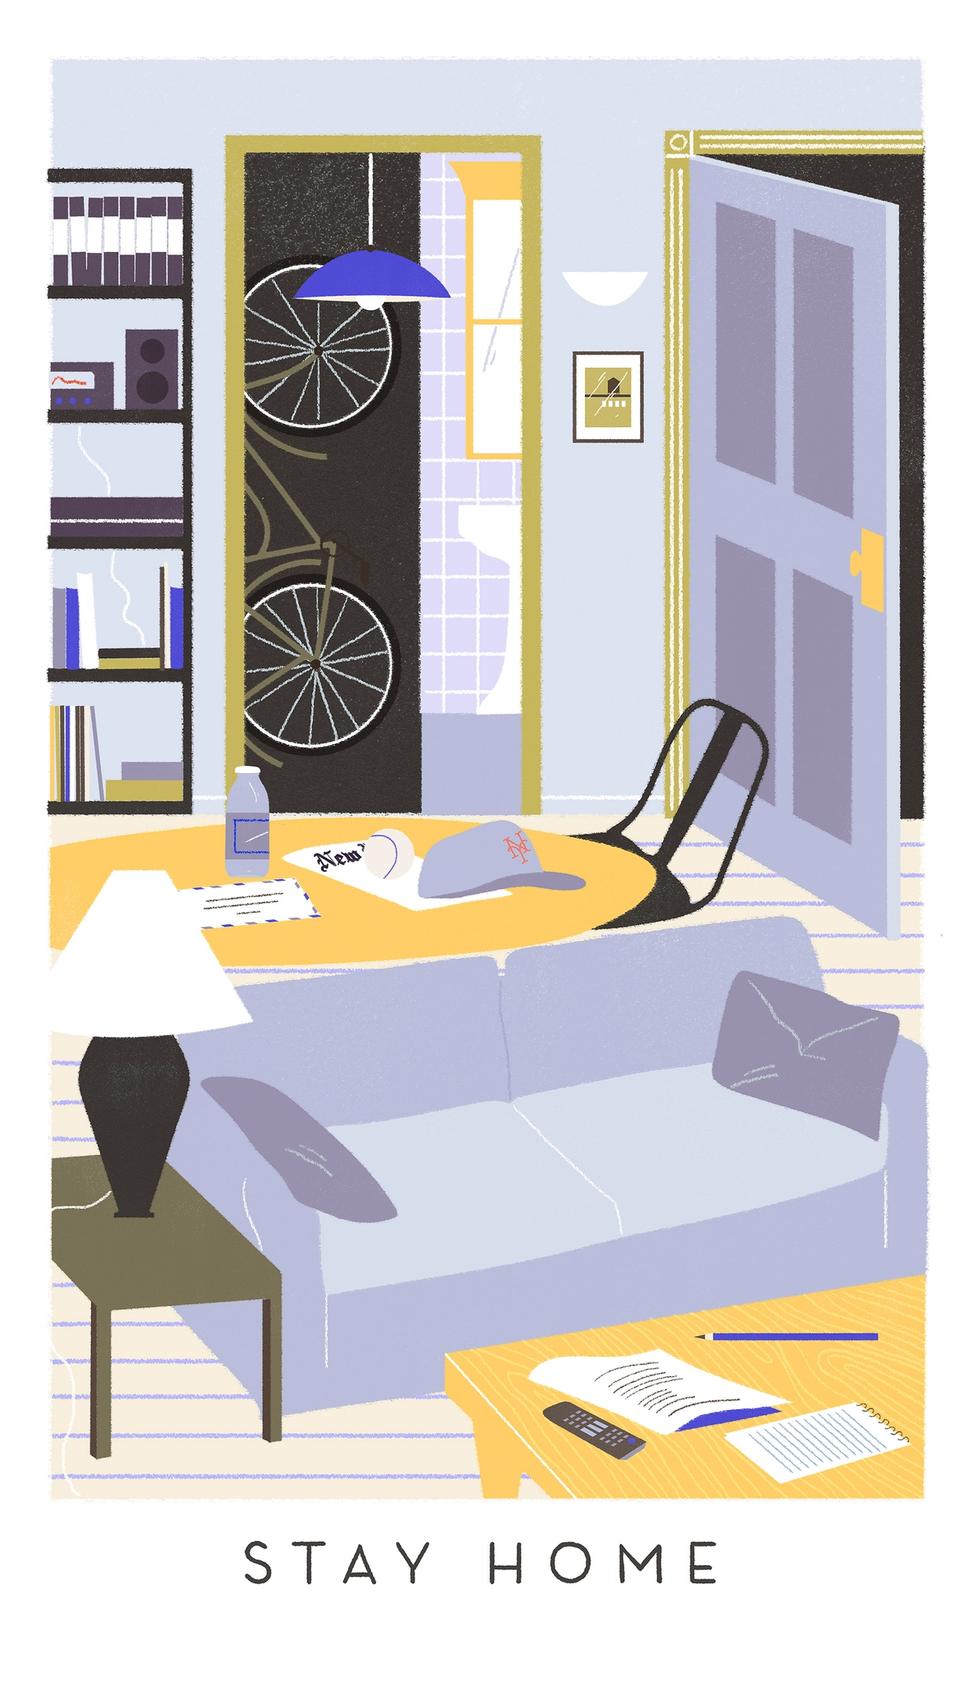 Illustration of Jerry Seinfeld New York apartment interior, from Seinfeld TV show